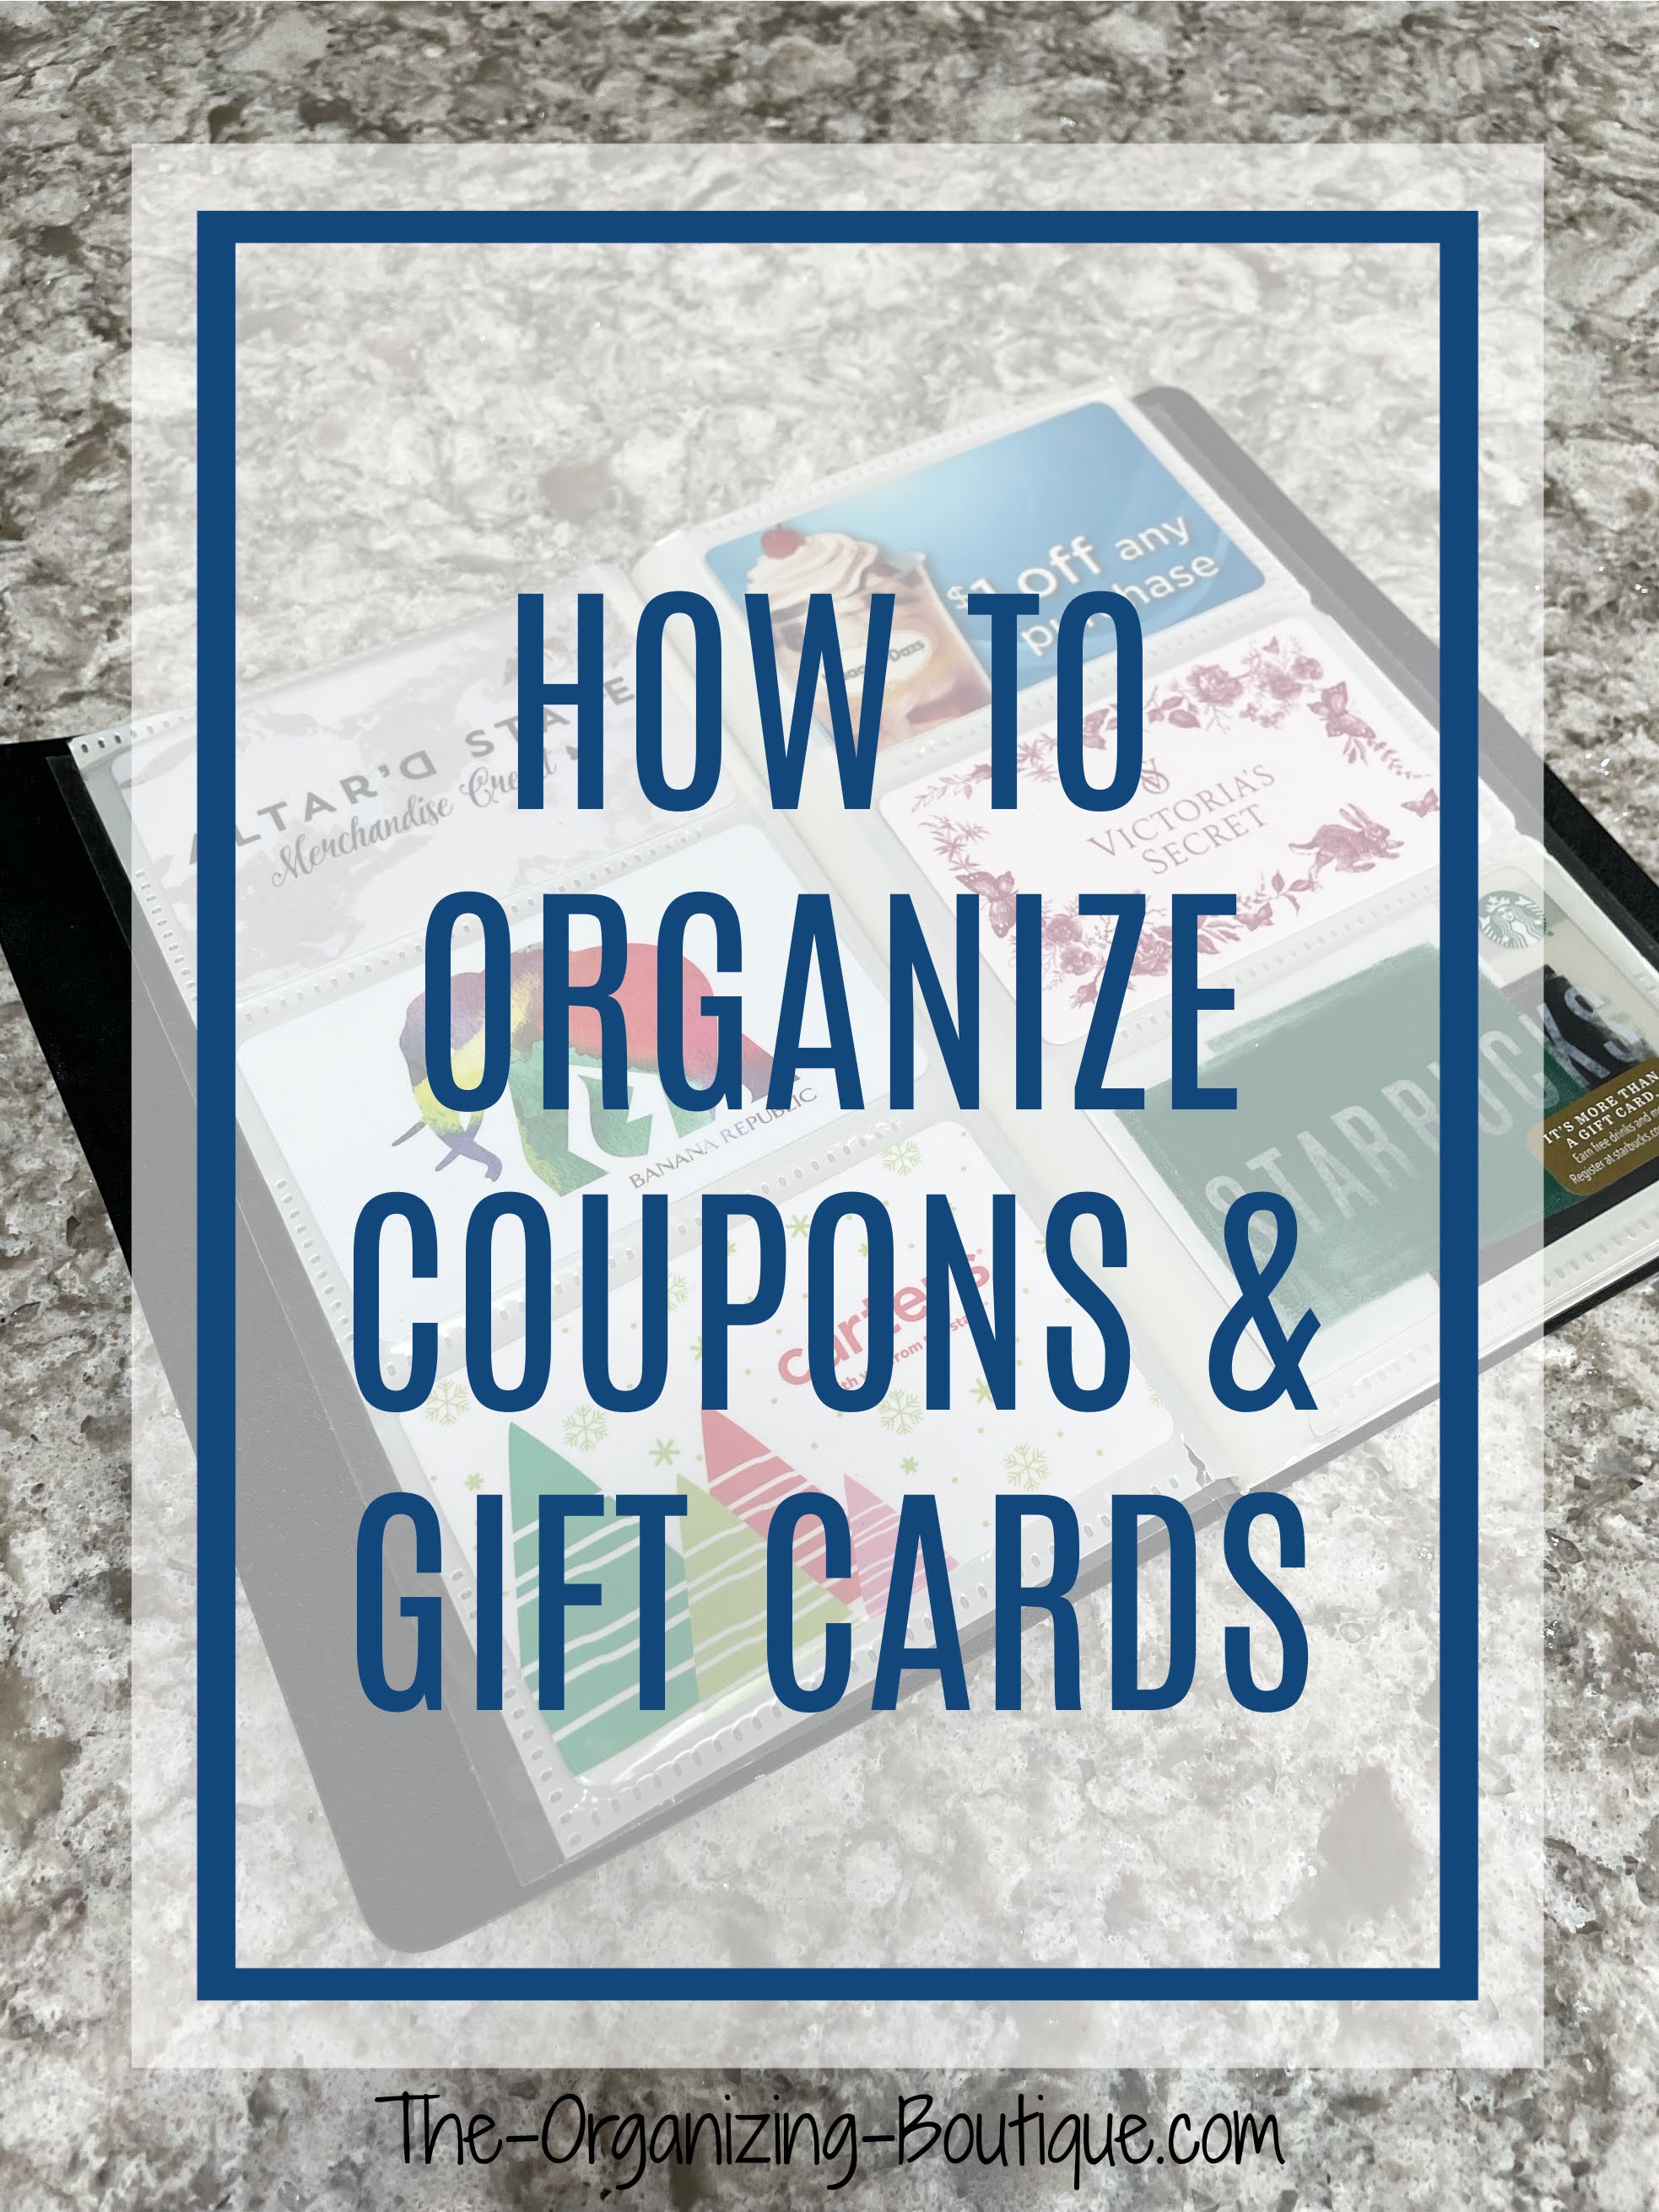 Don't let them expire! Here's how to organize coupons and gift cards as well as some fun coupon organizers.